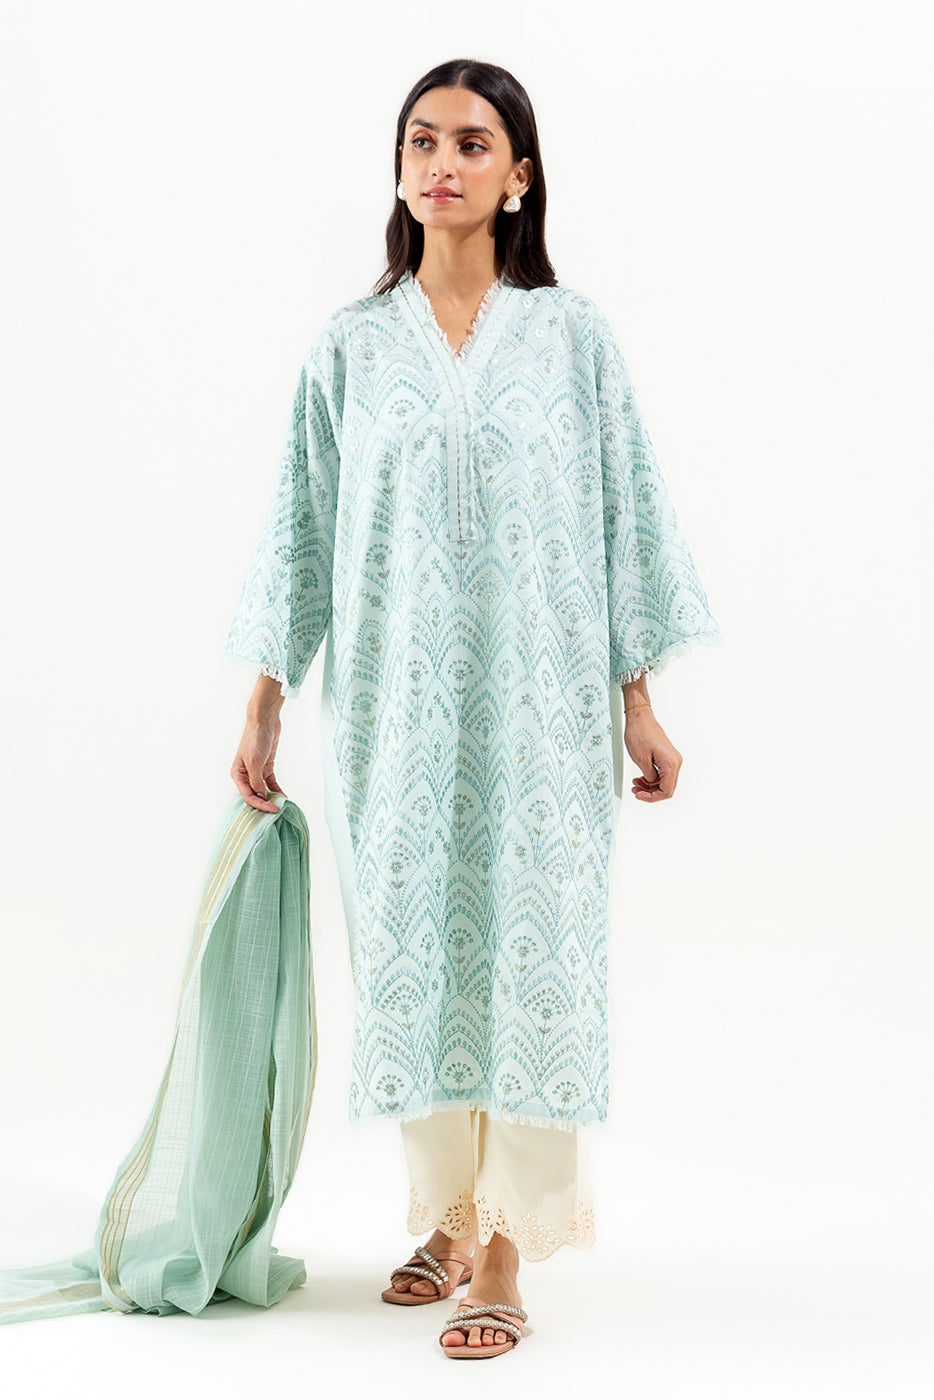 2 PIECE EMBROIDERED LAWN SUIT (LUXURY-PRET)